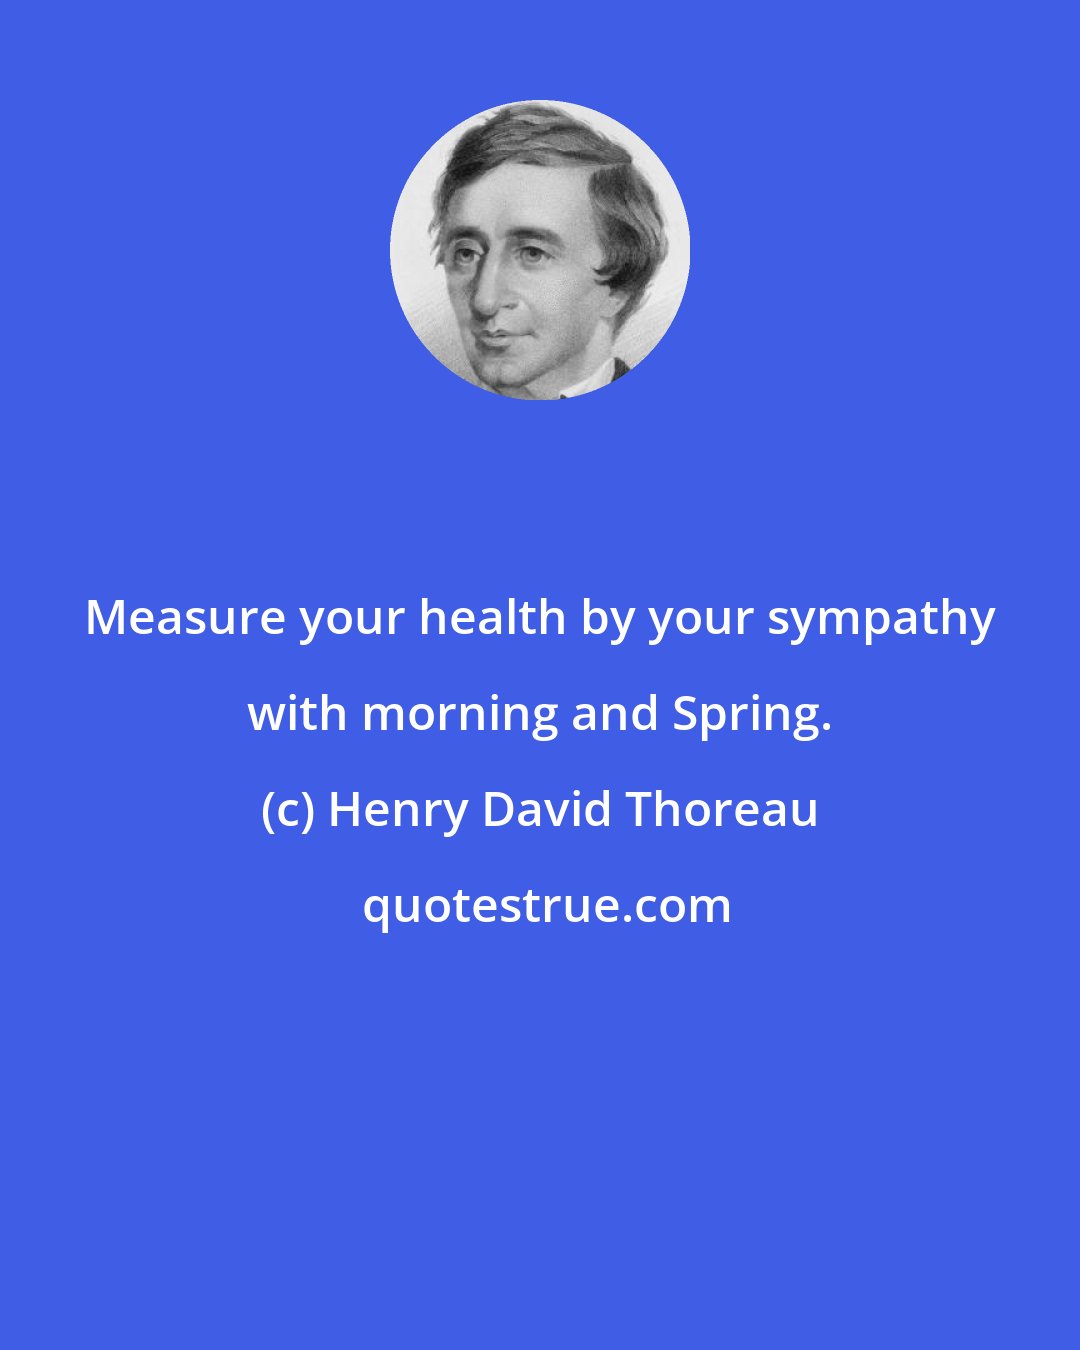 Henry David Thoreau: Measure your health by your sympathy with morning and Spring.